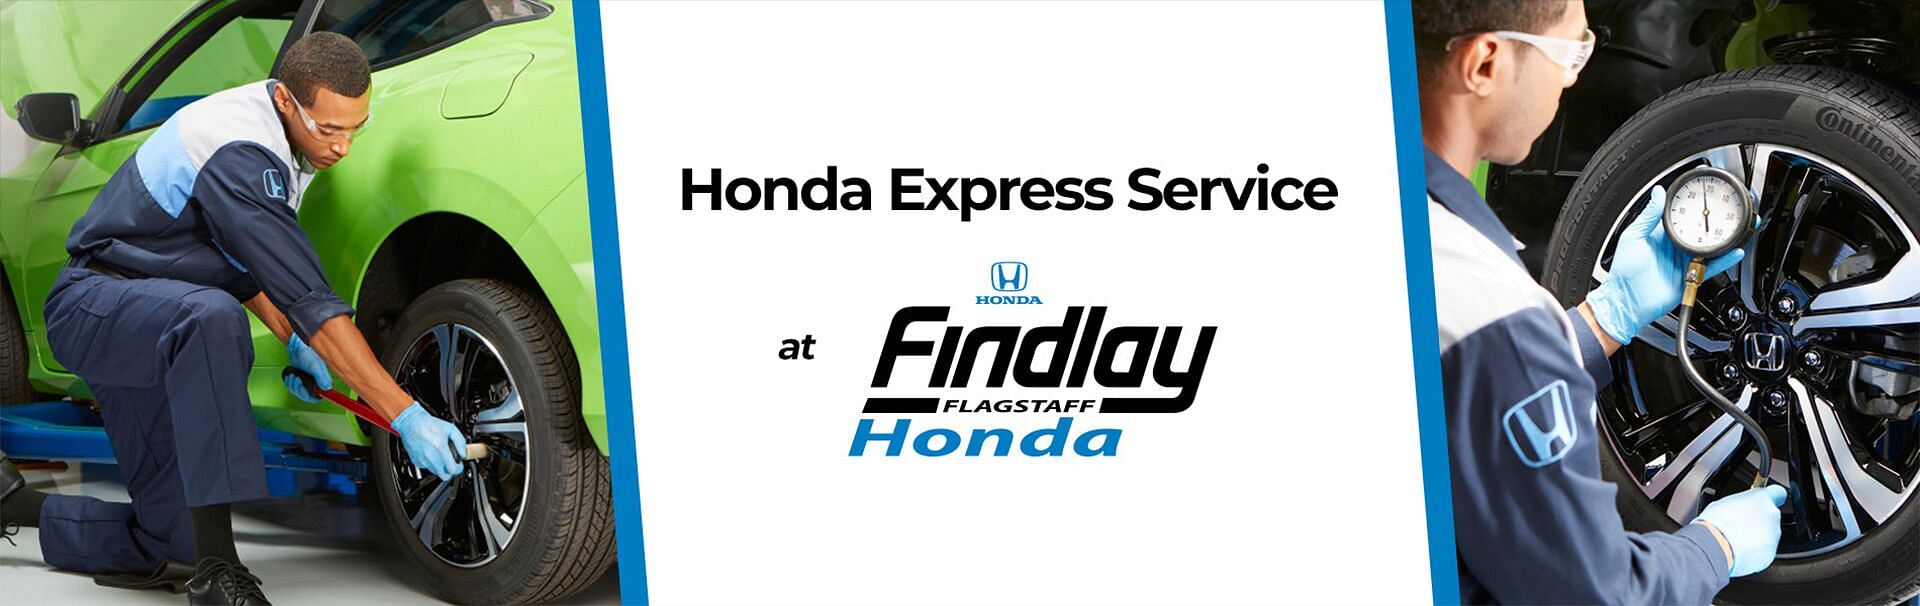 On the left, a honda service worker tightens a wheel on a green honda; on the right, a honda service worker checks tire pressure; in the center, a sign reading honda express service at findlay honda flagstaff on a white background